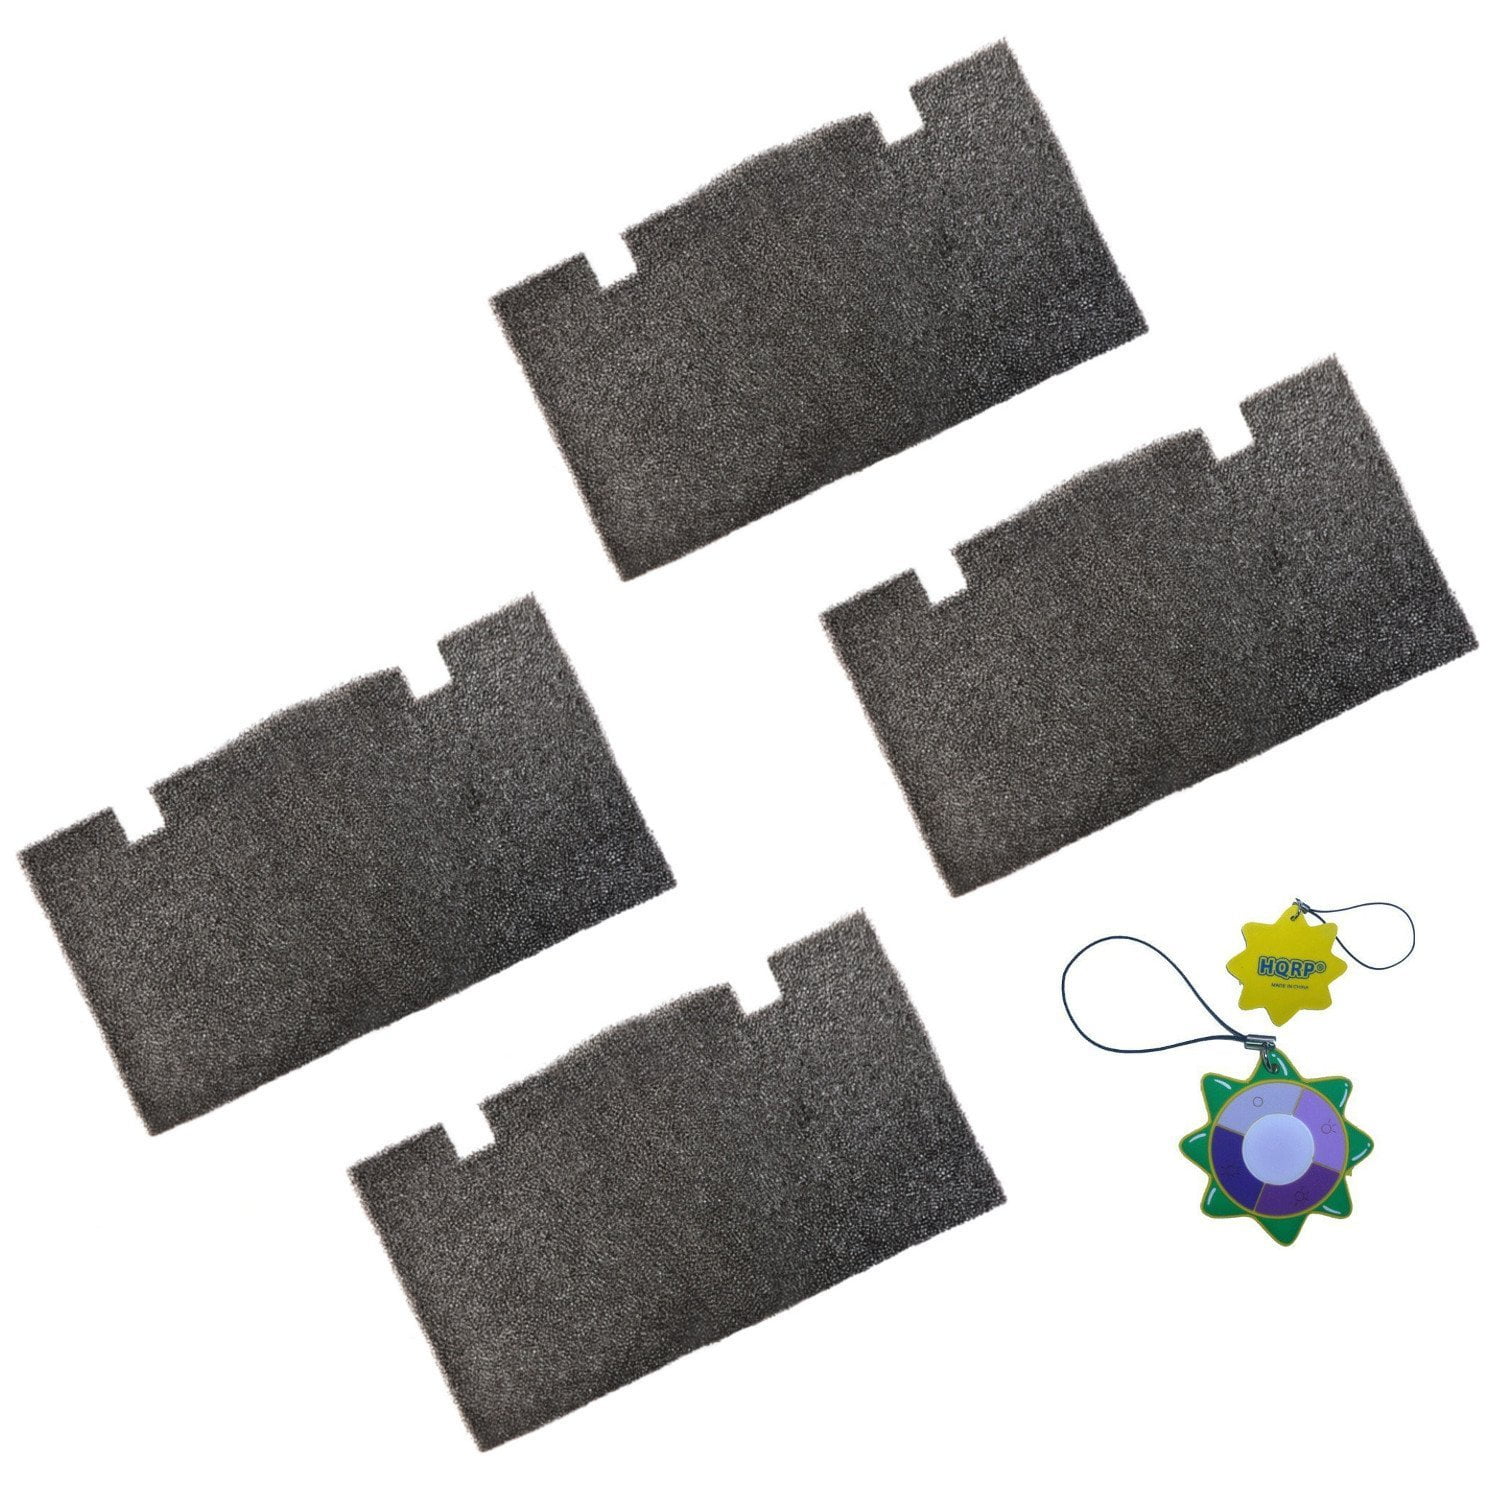 HQRP 4 pcs Air Conditioner Replacement Filter Pad for Dometic 3104928.